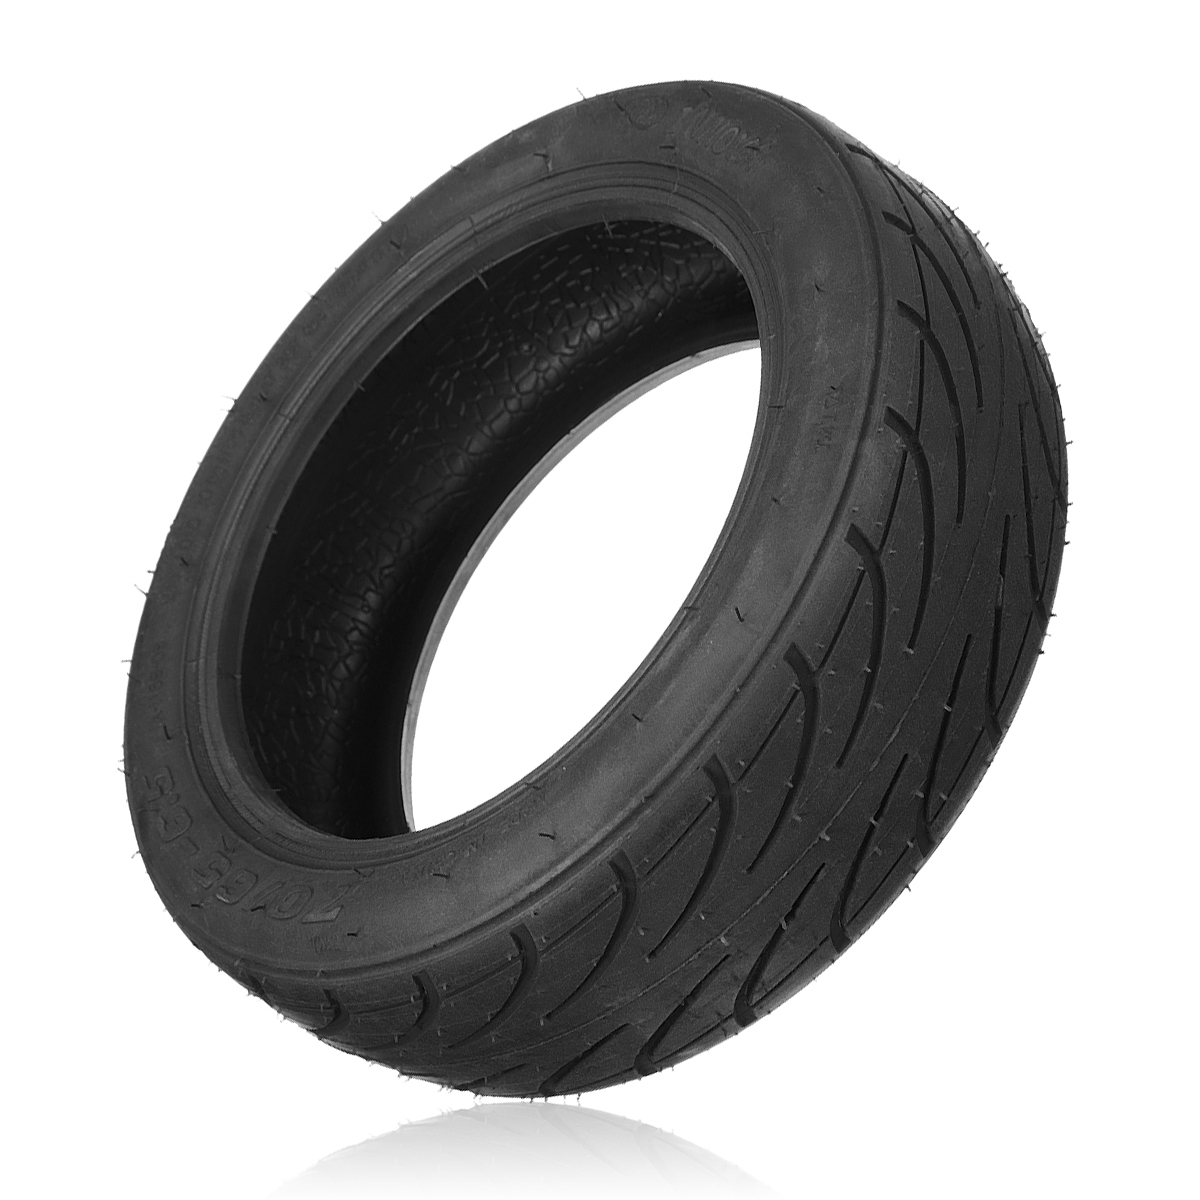 

Tubeless Tyre For Ninebot MiniPro Electric Balance Scooter Skateboard